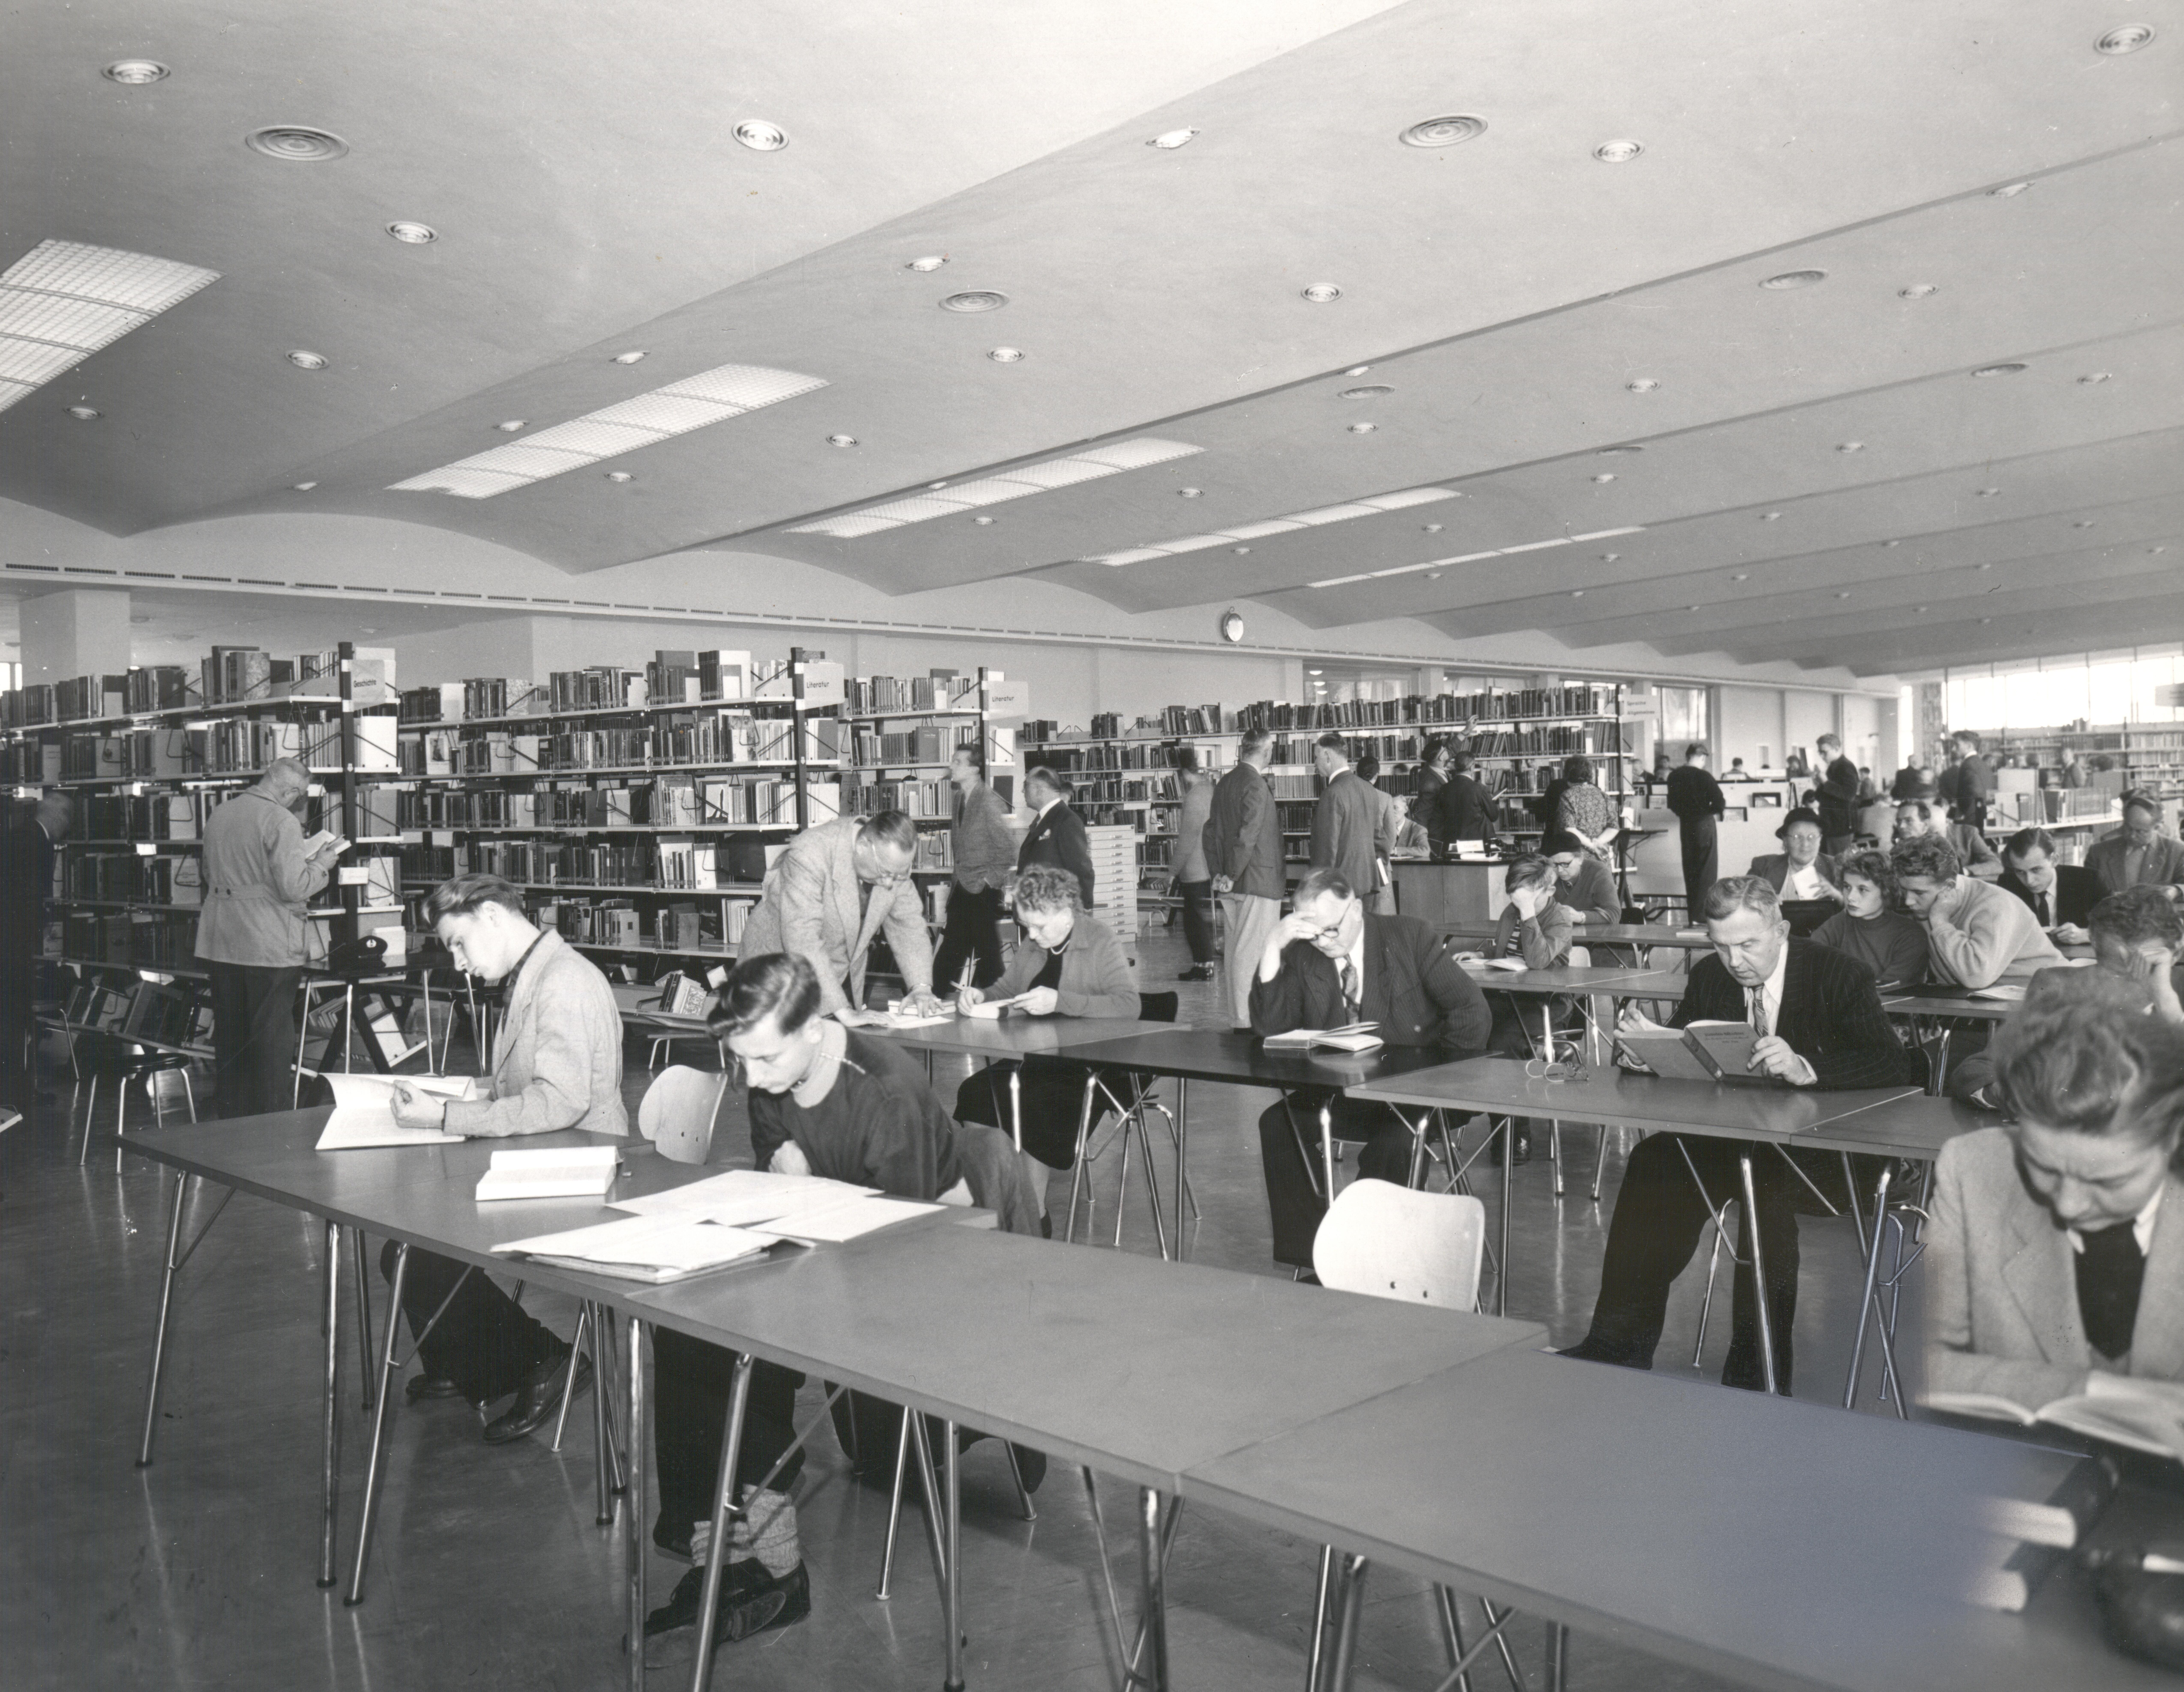 Historical shot of people sitting with books at long tables in library